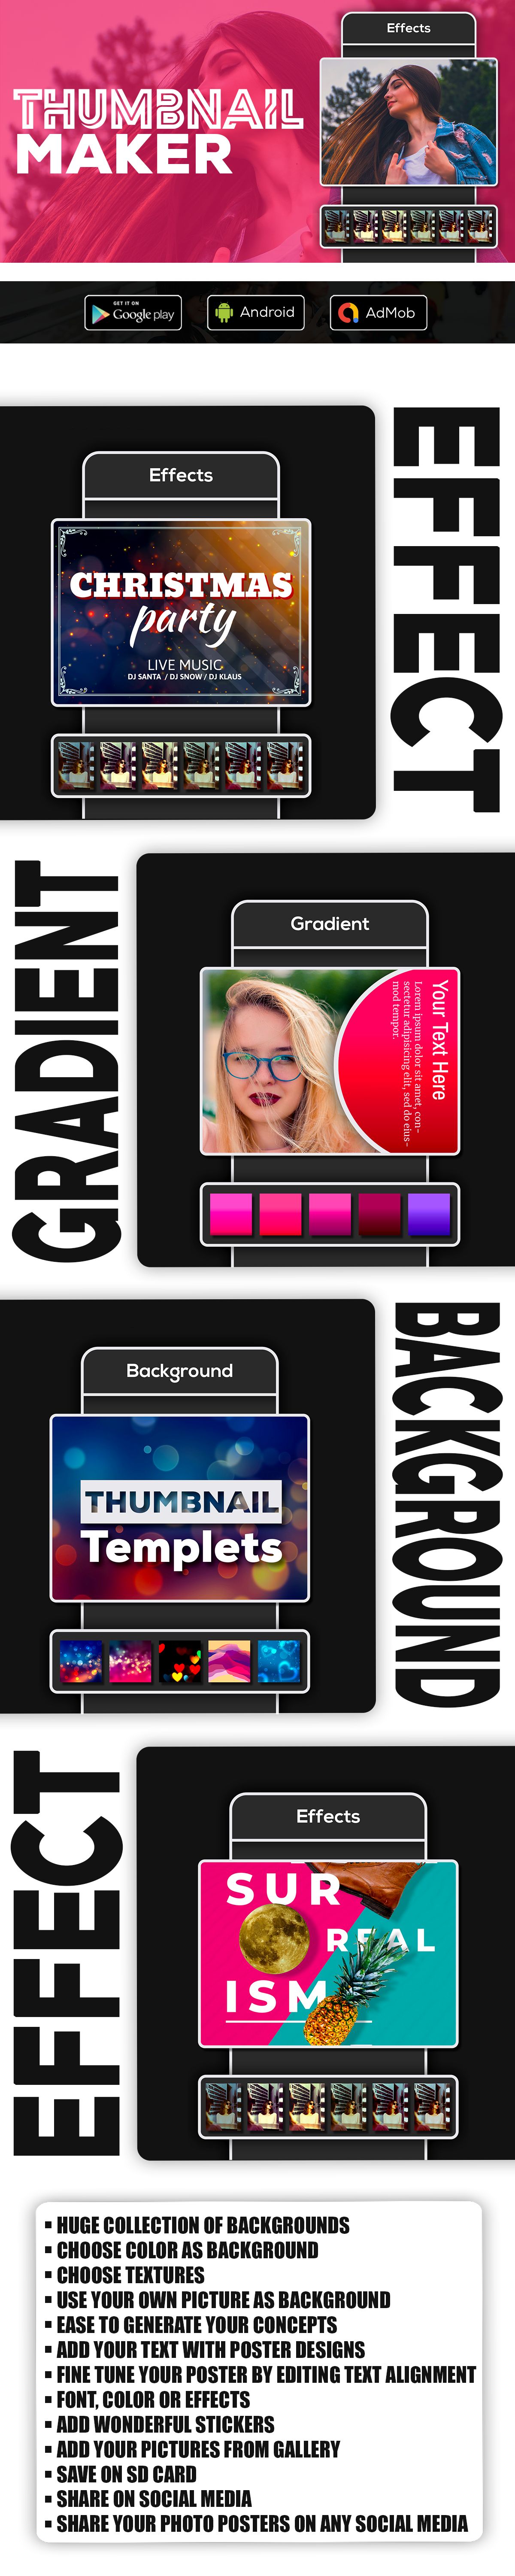 Ultimate Thumbnail Maker - Full Android code with Admob ads | Fb Ads - 1